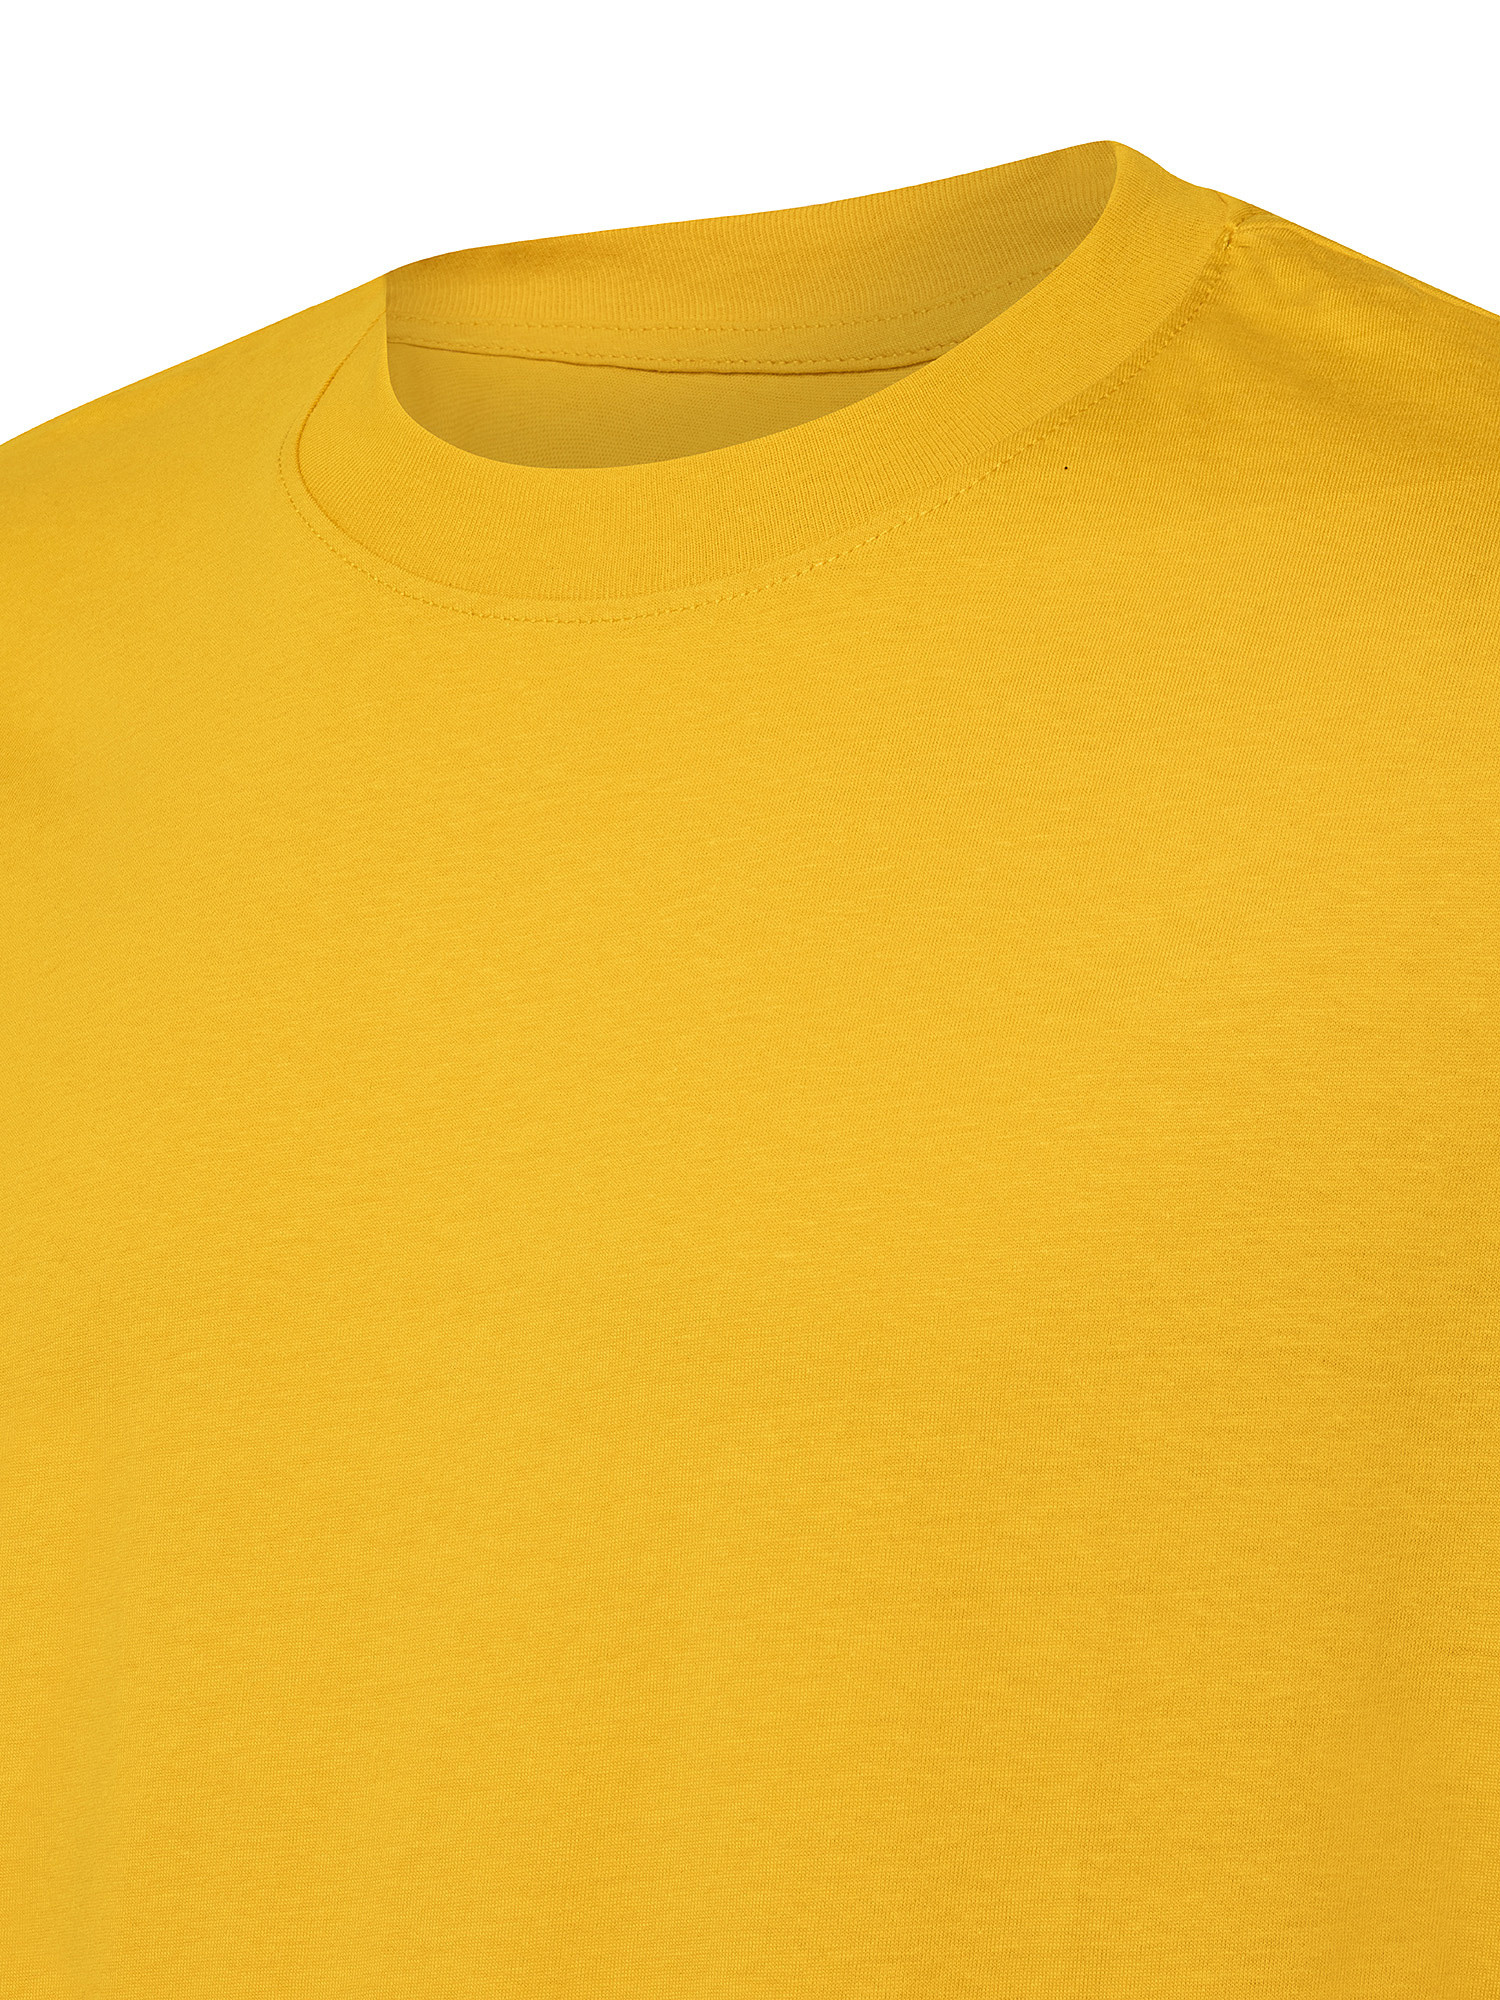 T-shirt 100% cotone, Giallo, large image number 2